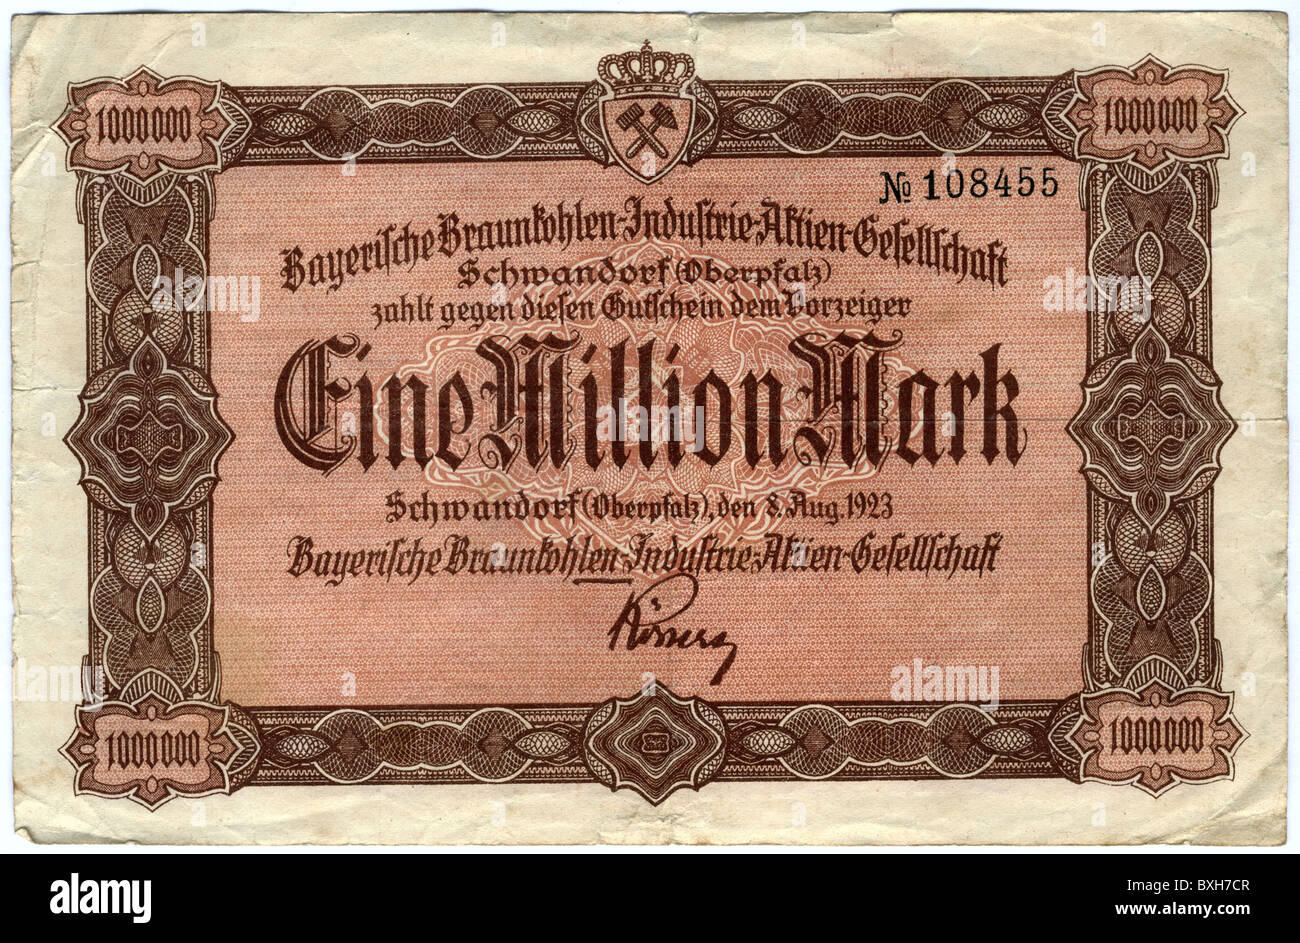 money / finance, inflation money, Germany, Bavaria, One Million Mark bond, issued by the Bavarian brown coal mining industry corporation, August 1923, banknotes, bank note, notes, 1000000, 1920s, economic crisis, depression, cut out, clipping, currency, 20th century, numismatics, historic, historical, 20s, inflation, banknote, bonds, cut-out, cut-outs, Additional-Rights-Clearences-Not Available Stock Photo